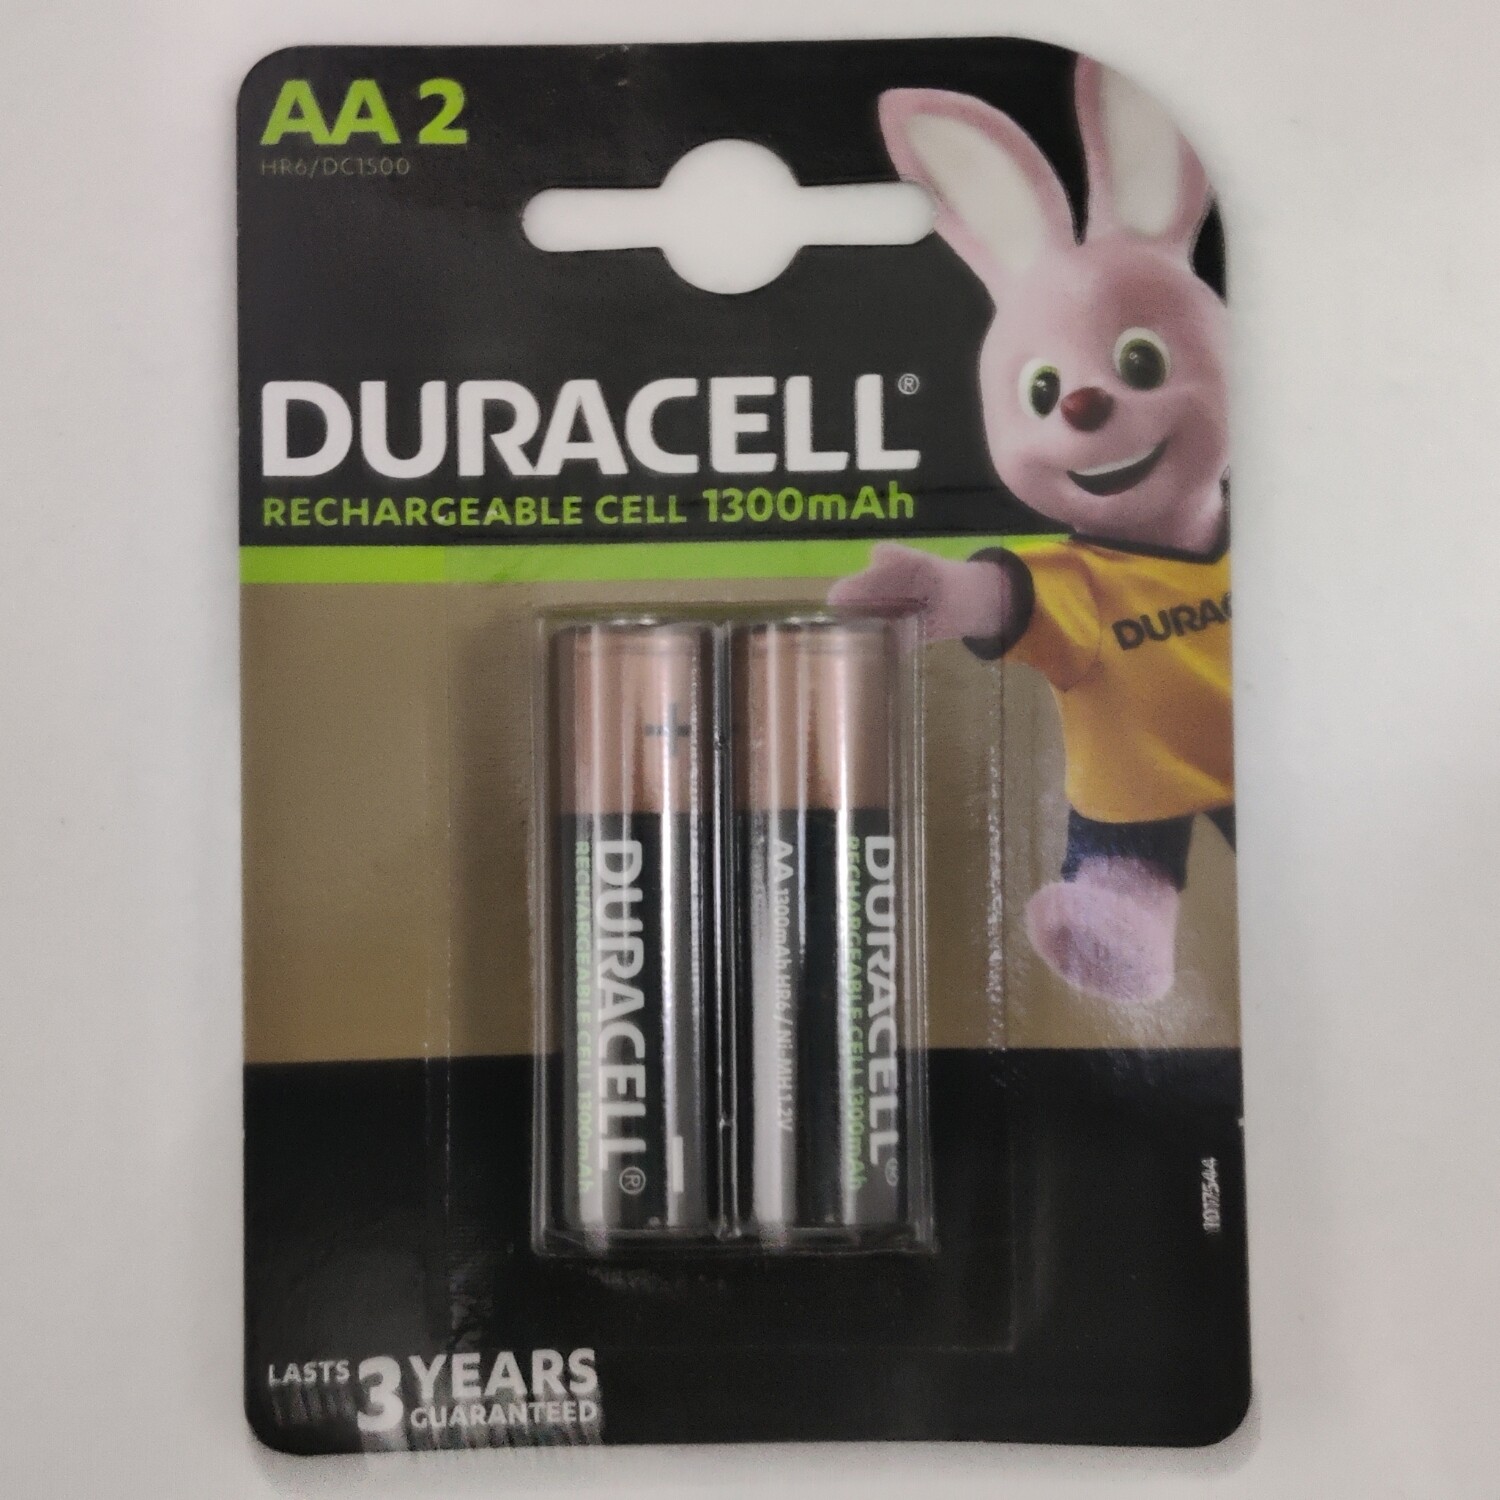 Duracell AA, 2 Batteries, 1300mAh, Rechargeable